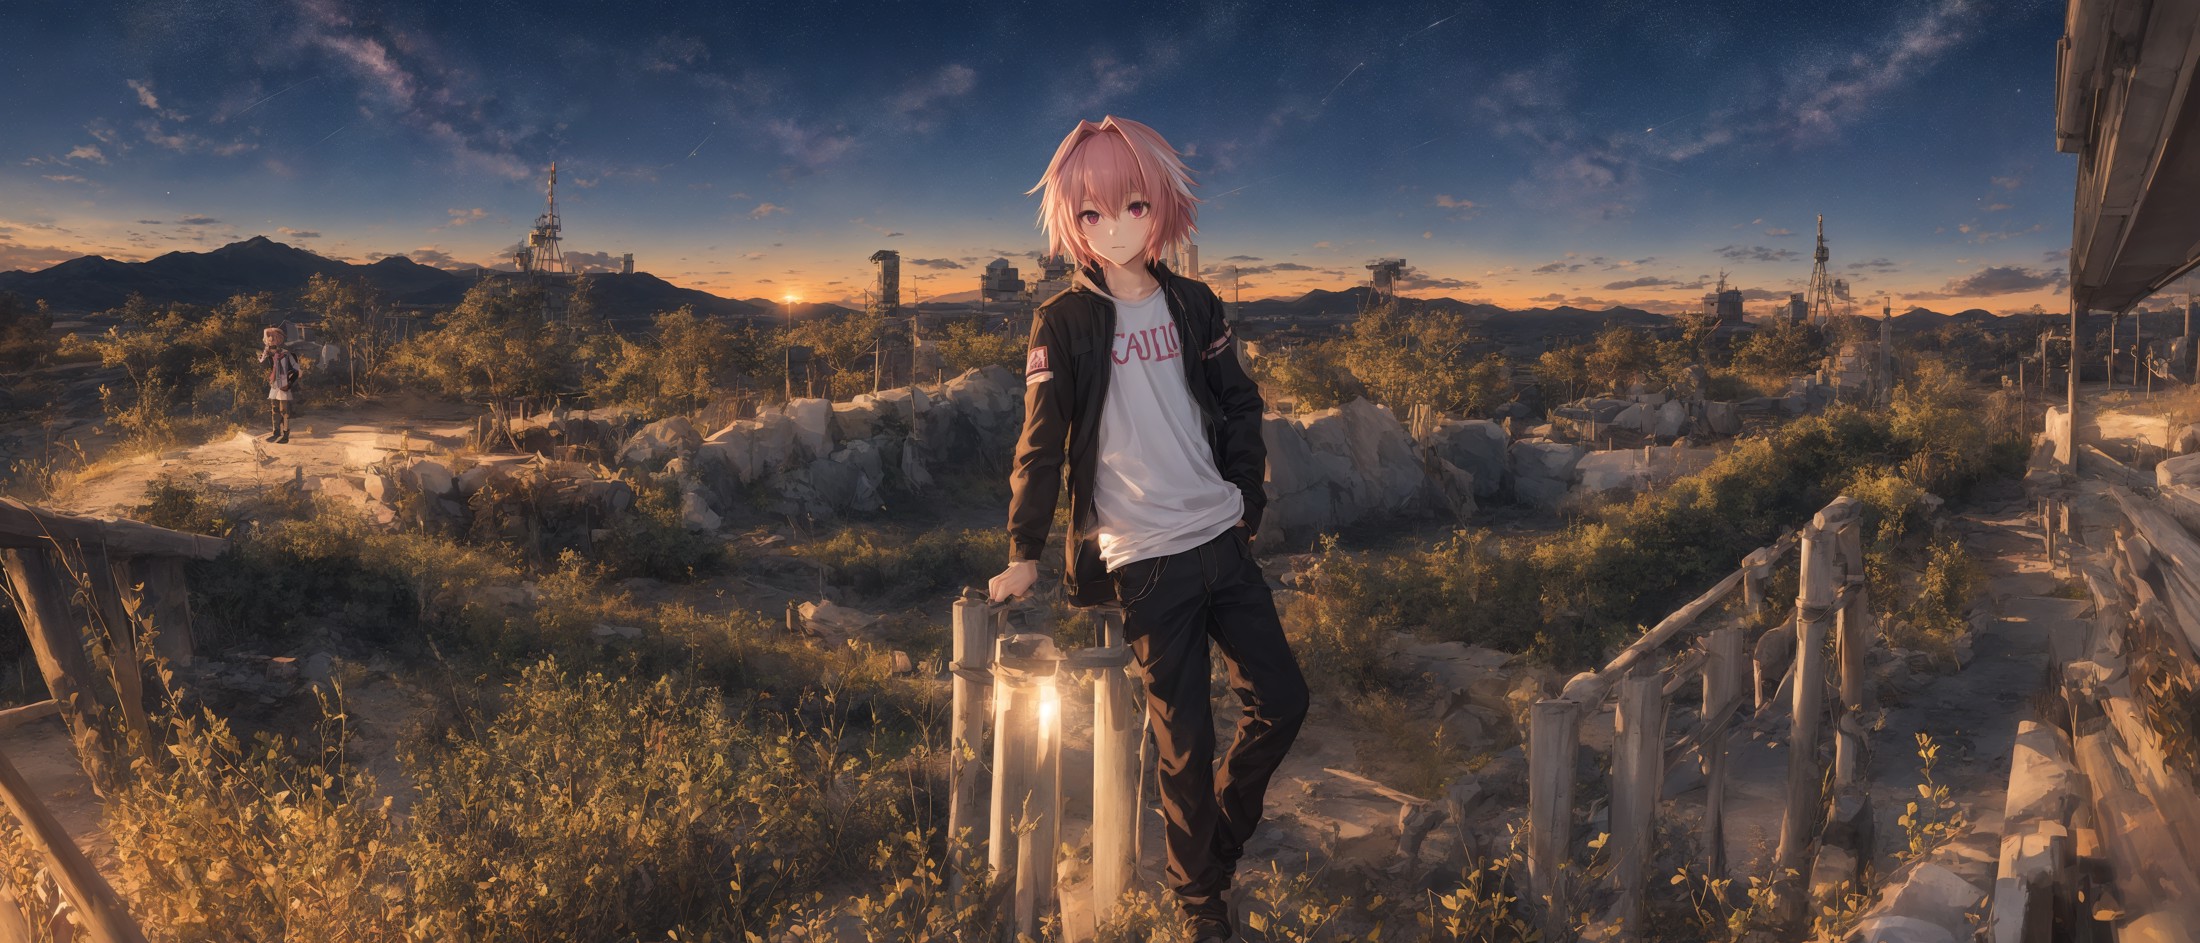 (aesthetic:0), (quality:0), (solo:0.98), (boy:0), (wide_shot:0), [astolfo], [[[[astrophotography]]]]